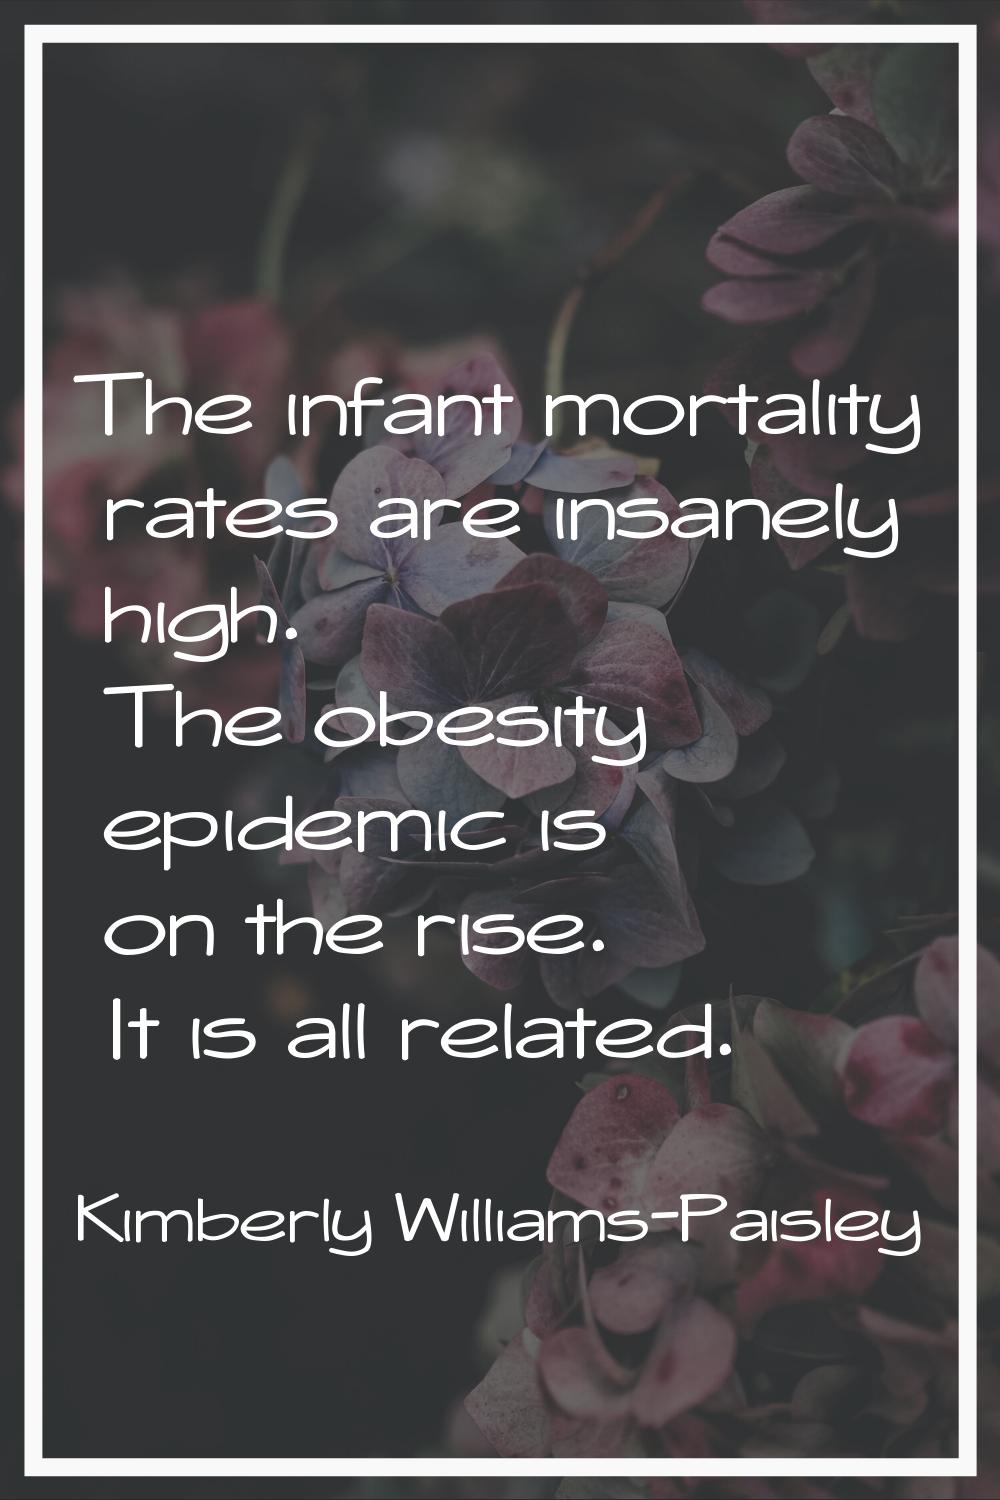 The infant mortality rates are insanely high. The obesity epidemic is on the rise. It is all relate